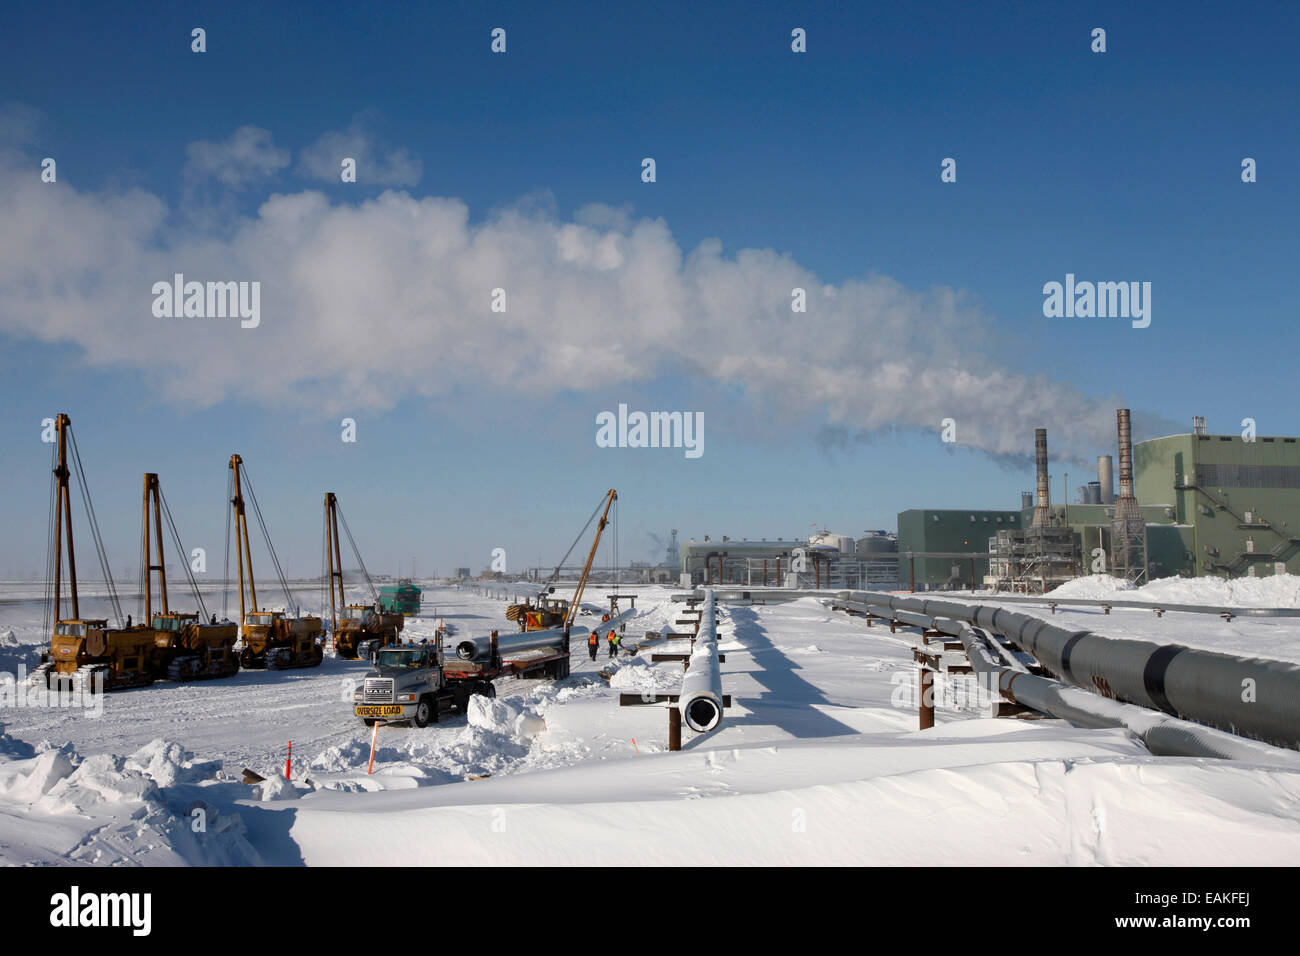 Cranes, Sidebooms, And Trucks All Available For Pipeline Work At Prudhoe Bay, Arctic Alaska, Winter Stock Photo